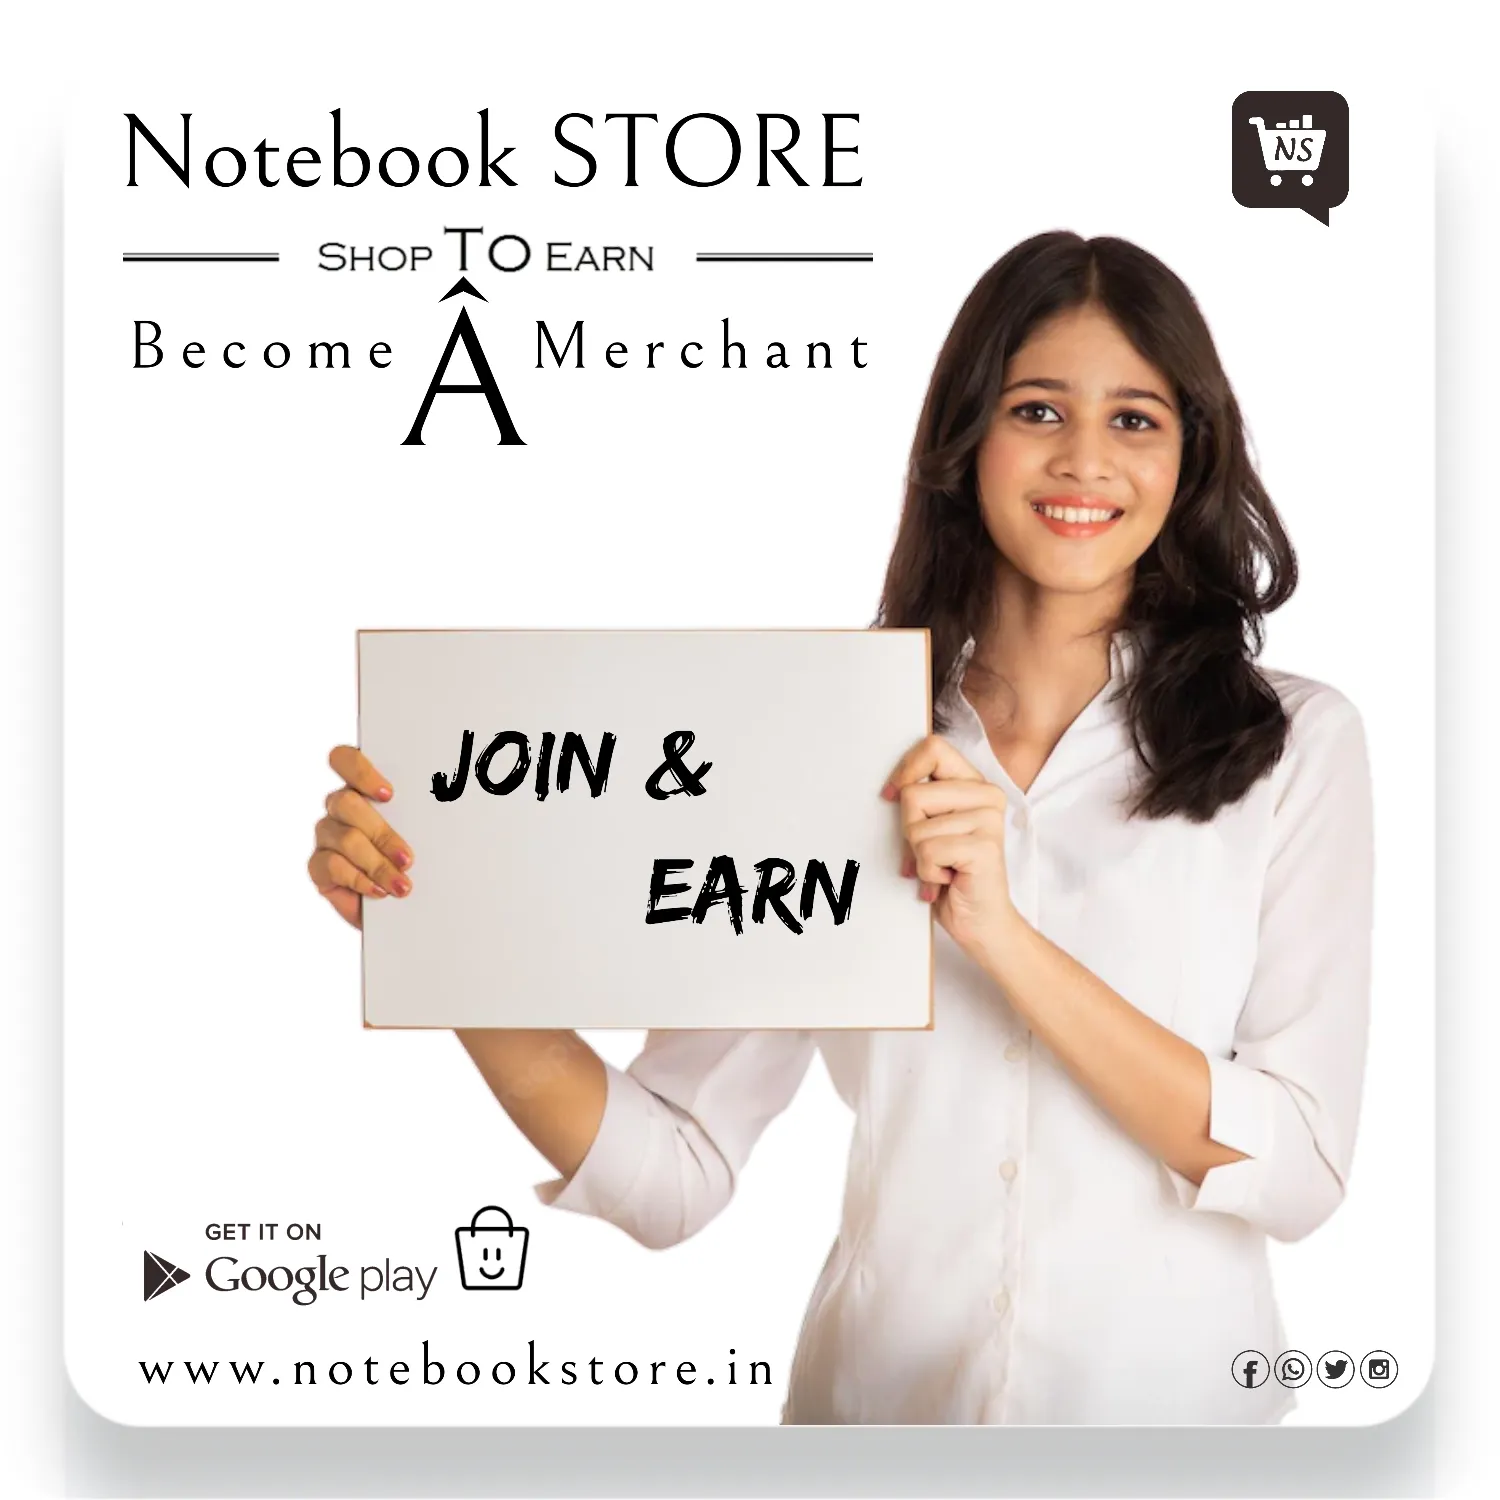 Notebook Store